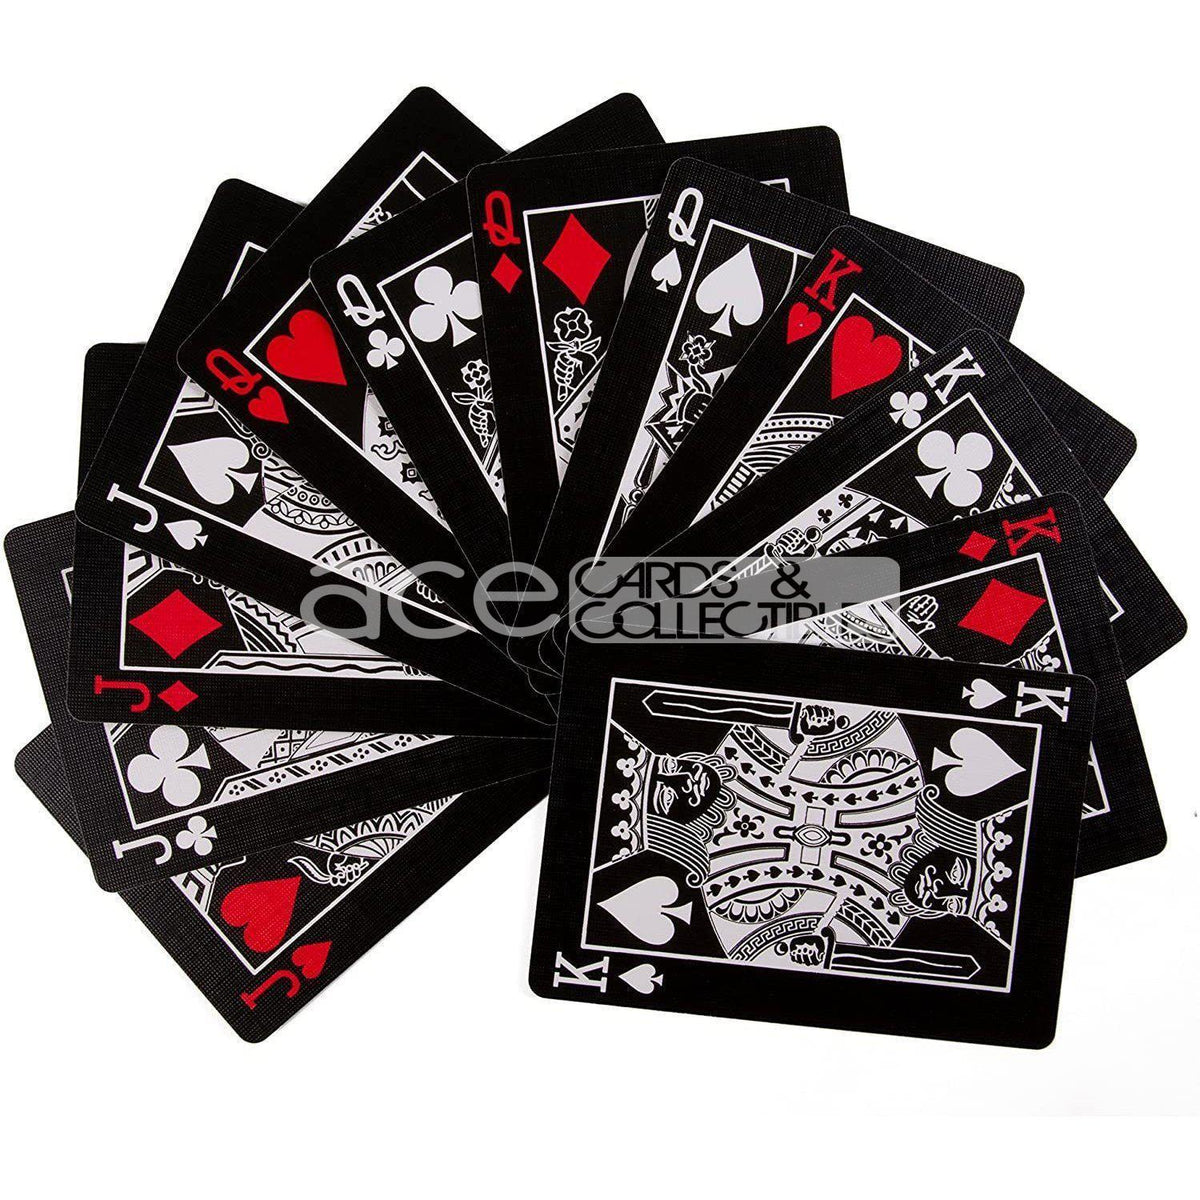 Bicycle Black Tiger Deck Playing Cards-United States Playing Cards Company-Ace Cards &amp; Collectibles